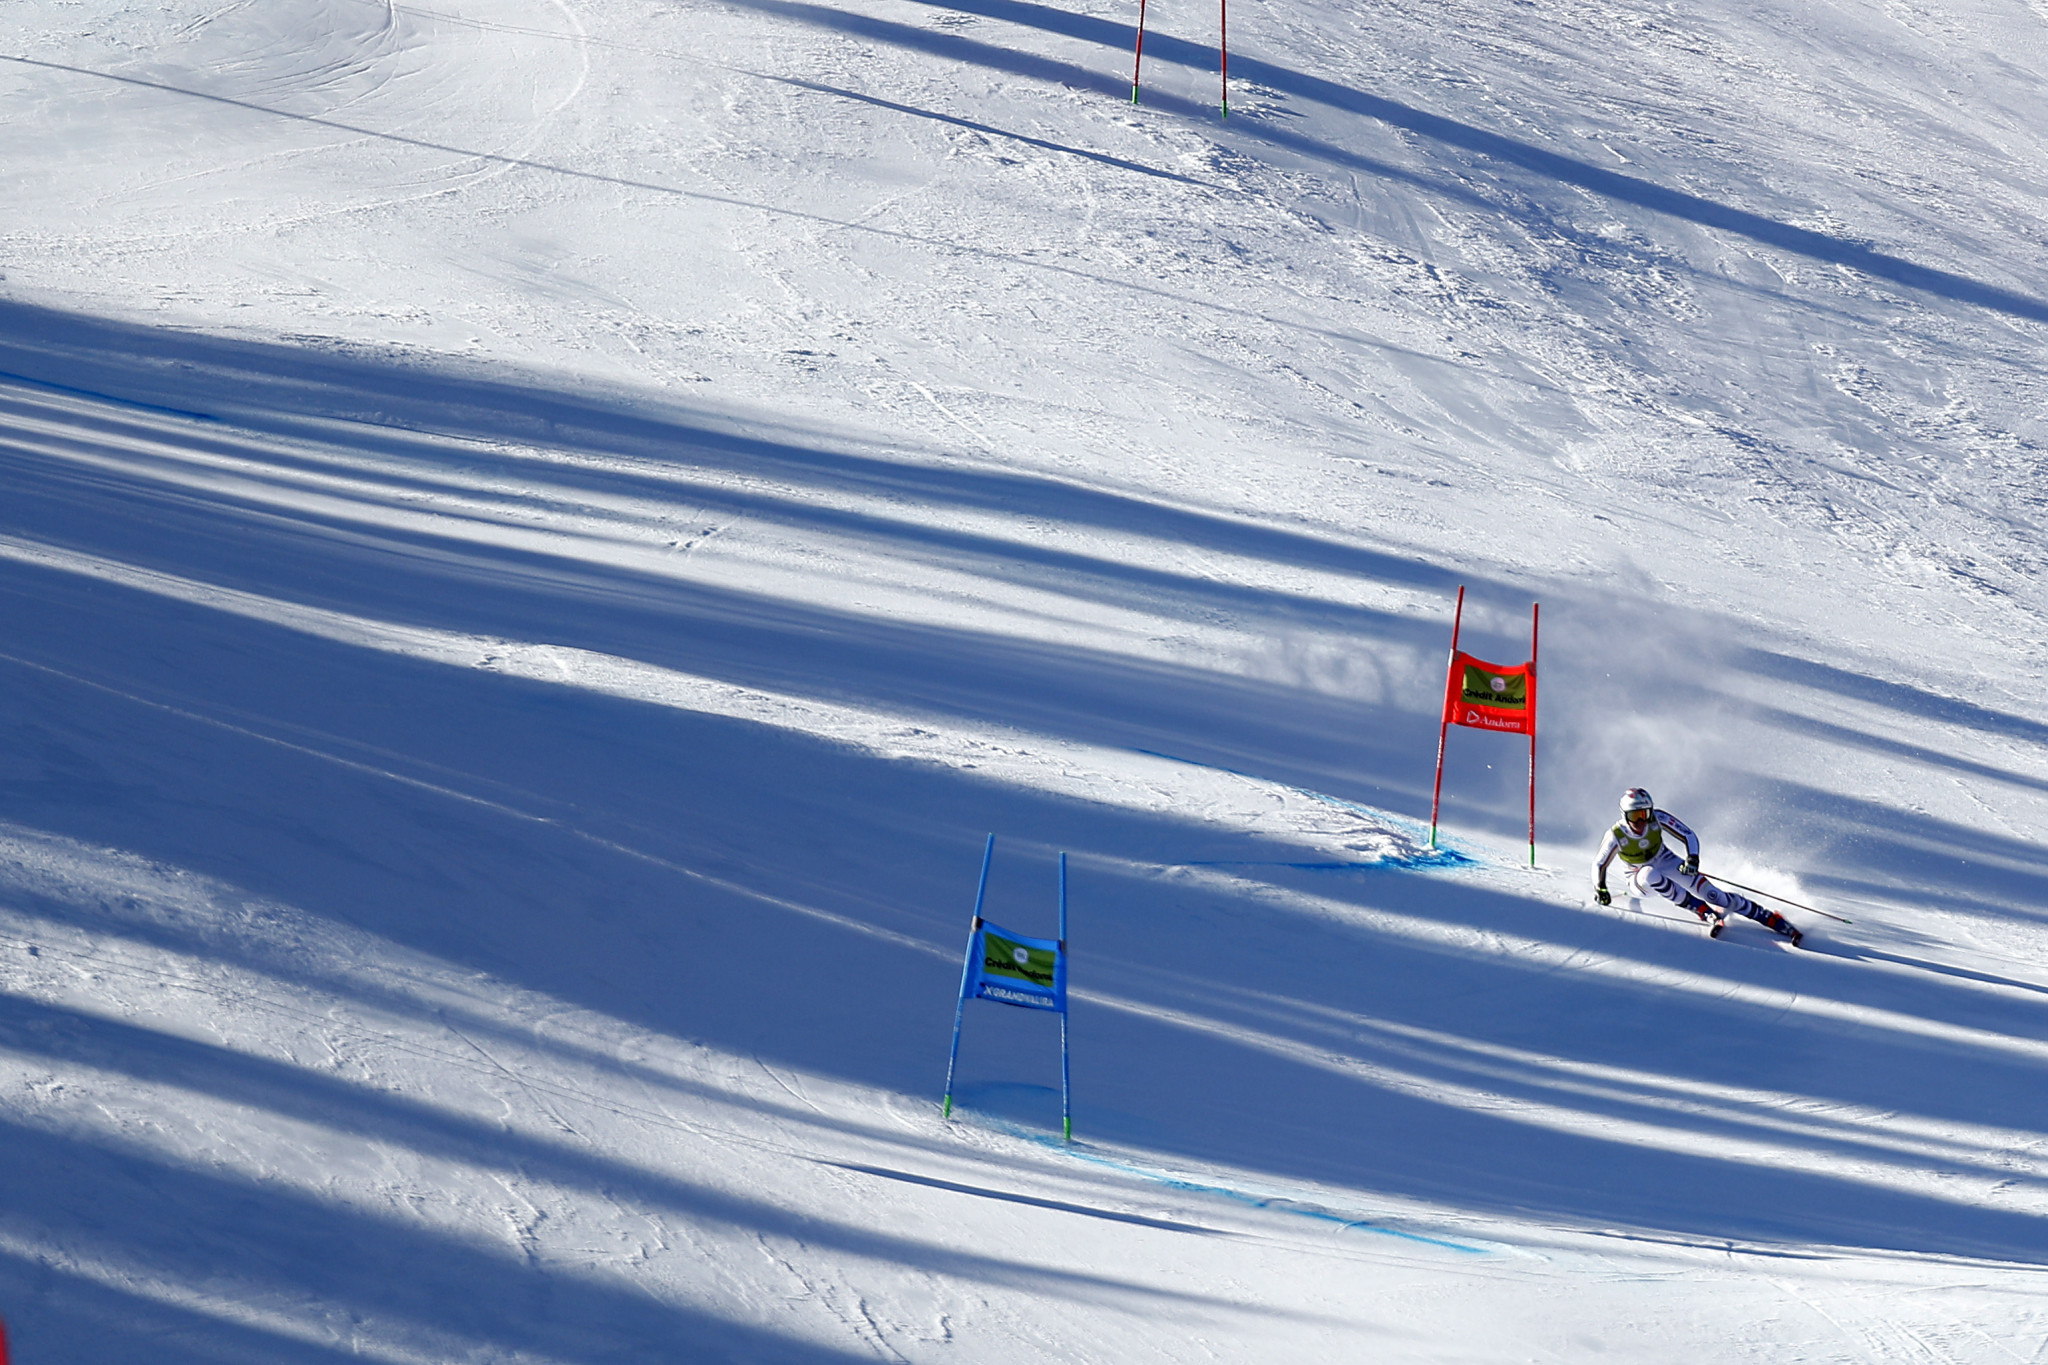 Andorra is seeking to host the FIS Alpine World Ski Championships ©Getty Images